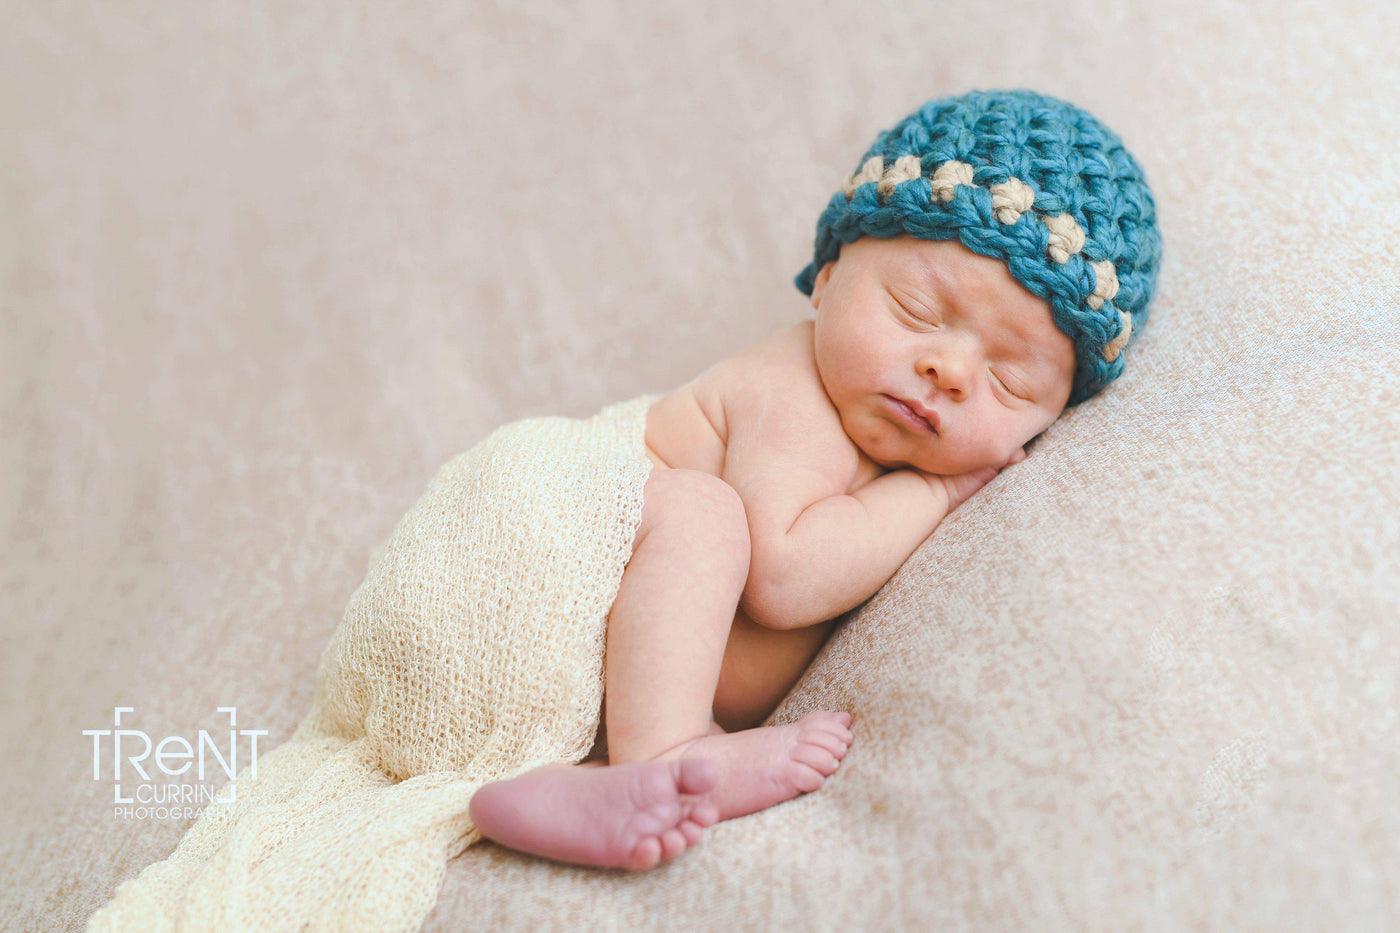 Teal Blue Tan Striped Hat - Beautiful Photo Props